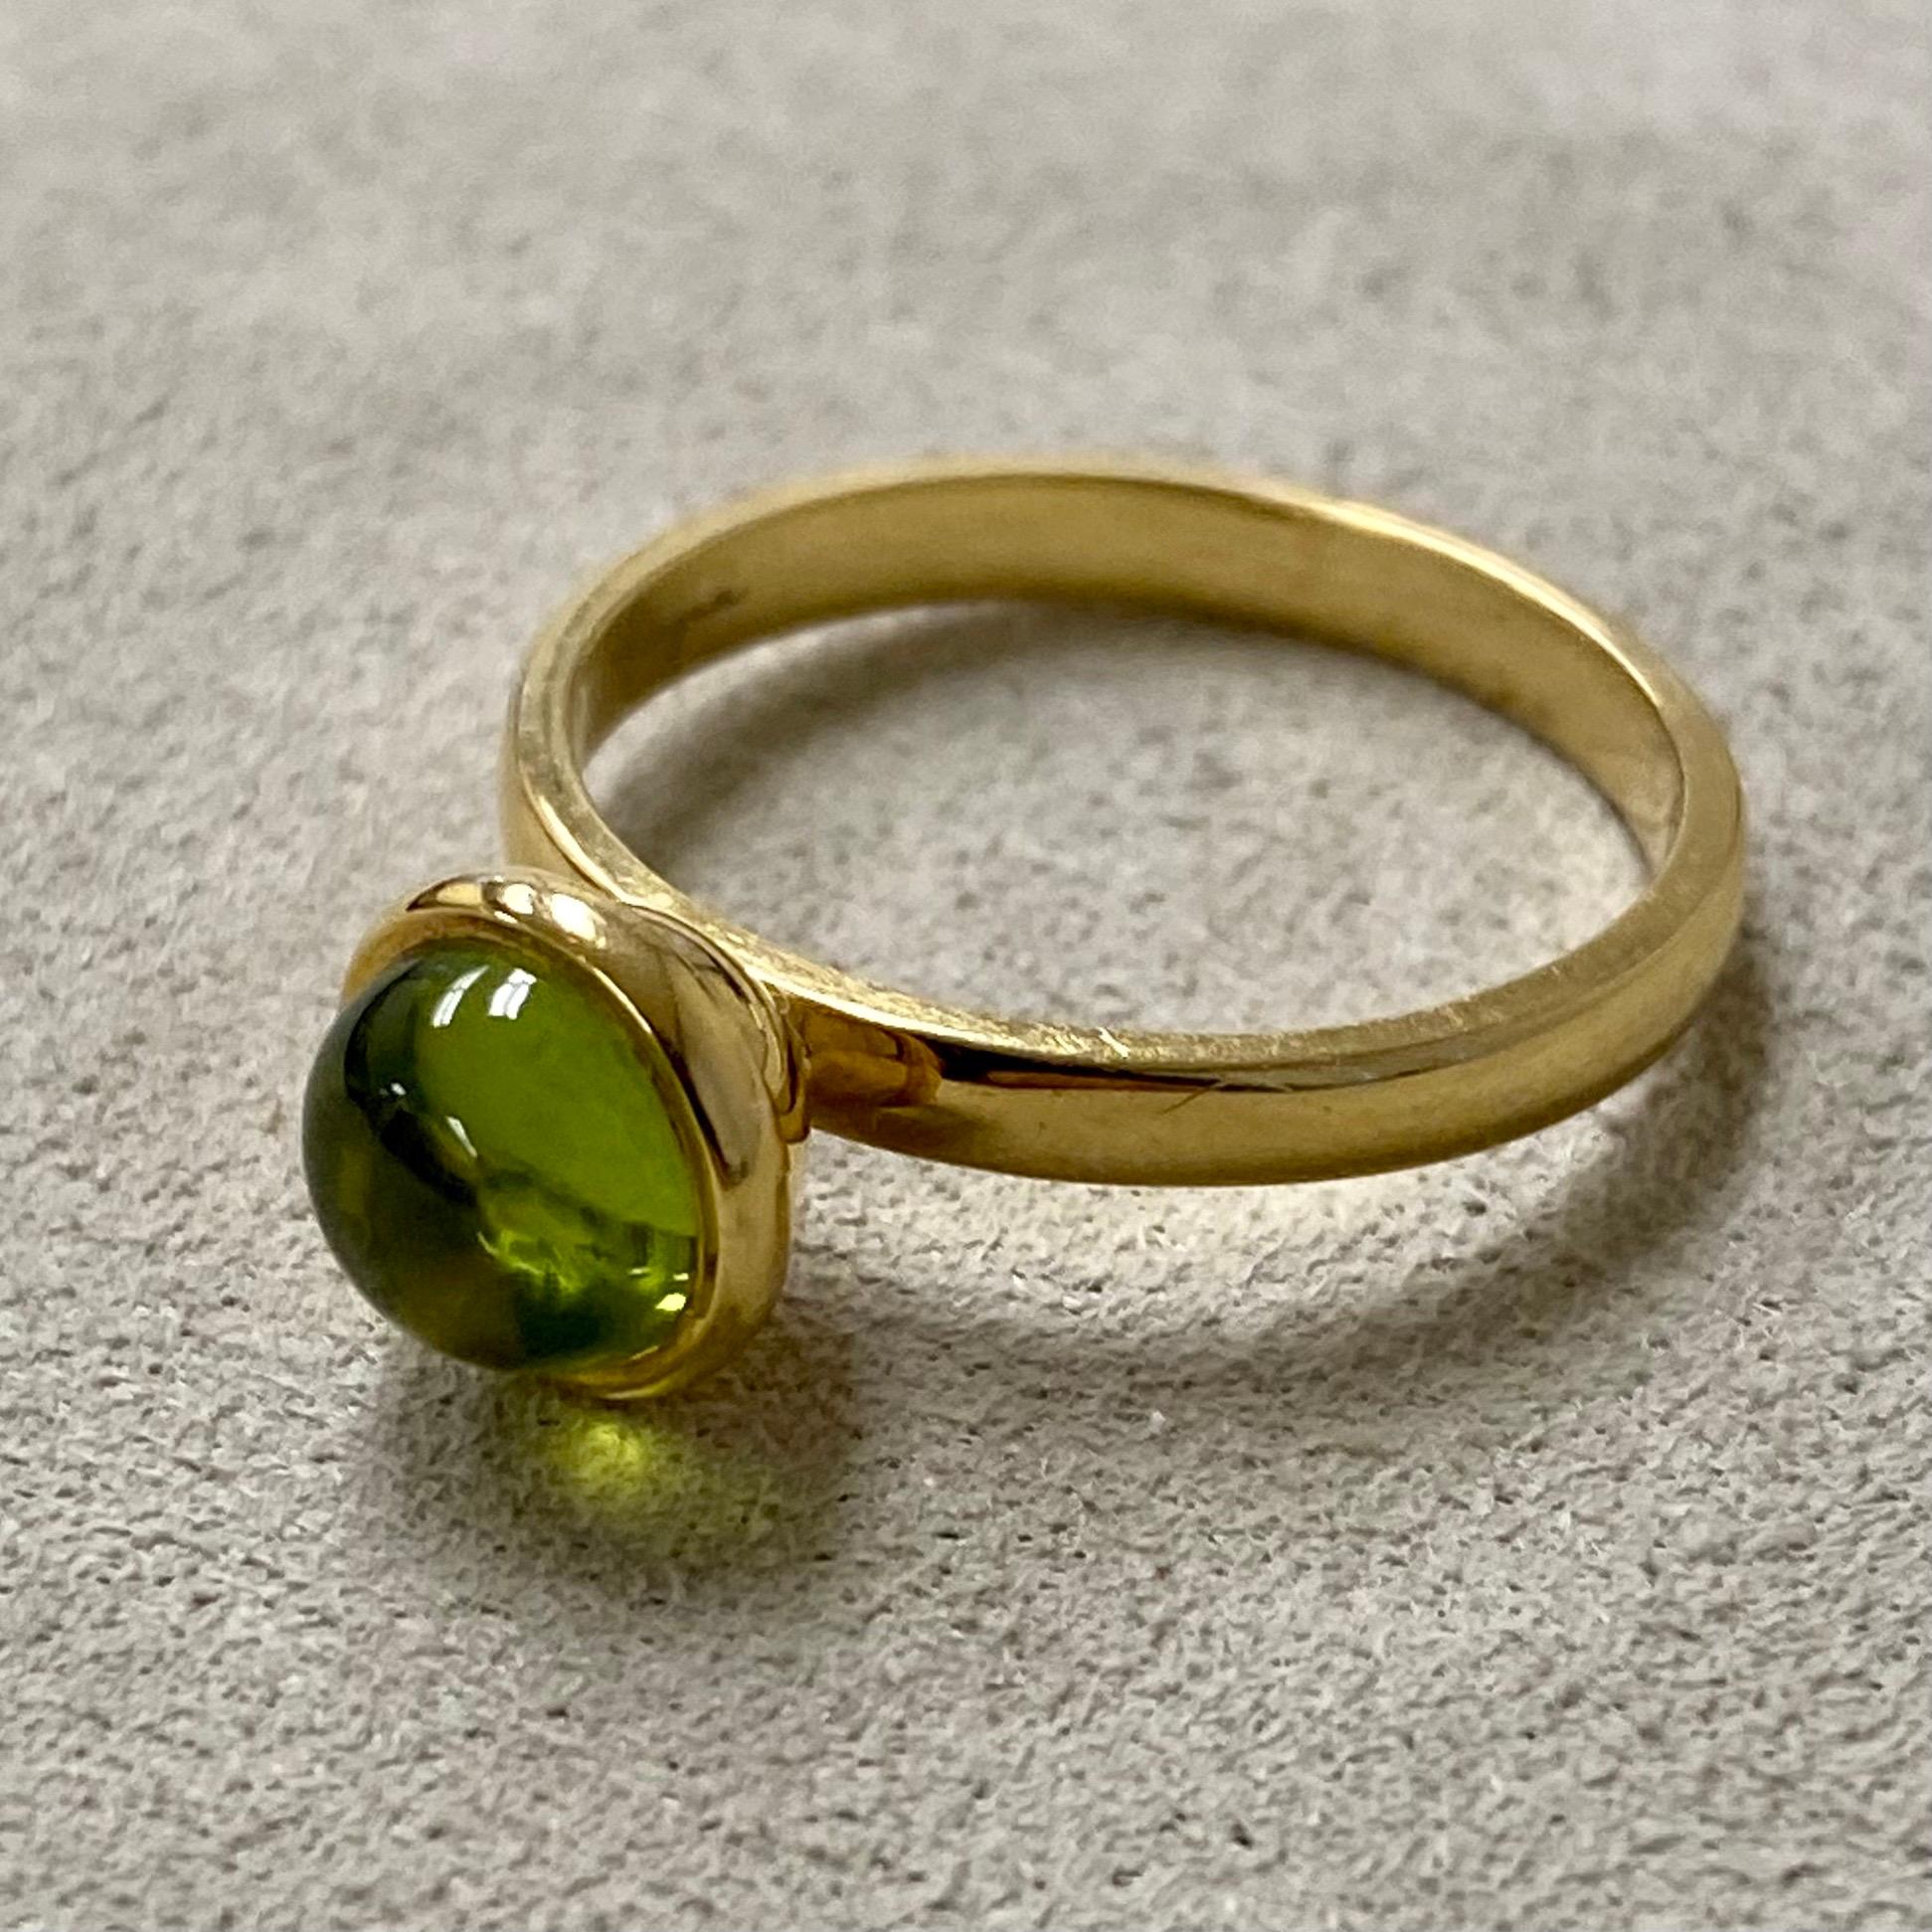 Created in 18 karat yellow gold
Peridot 2 carats approx.
Ring size US 6.5, can be sized upon request.

Crafted from 18K yellow gold, this ring features a glittering 2-carat peridot gemstone. It is sized US6.5, but can be resized upon